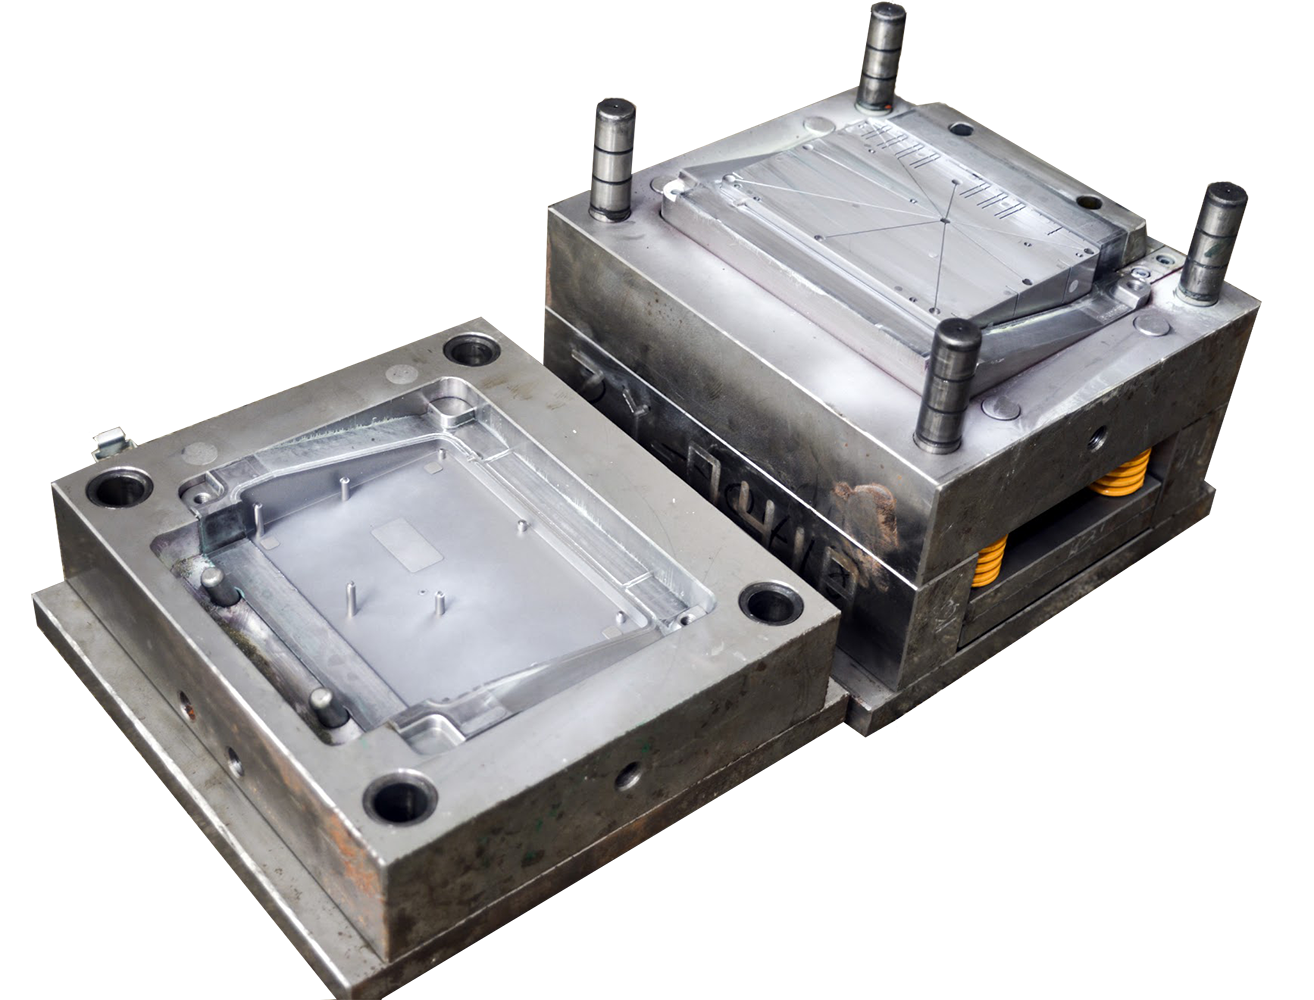 Design of the final injection mold